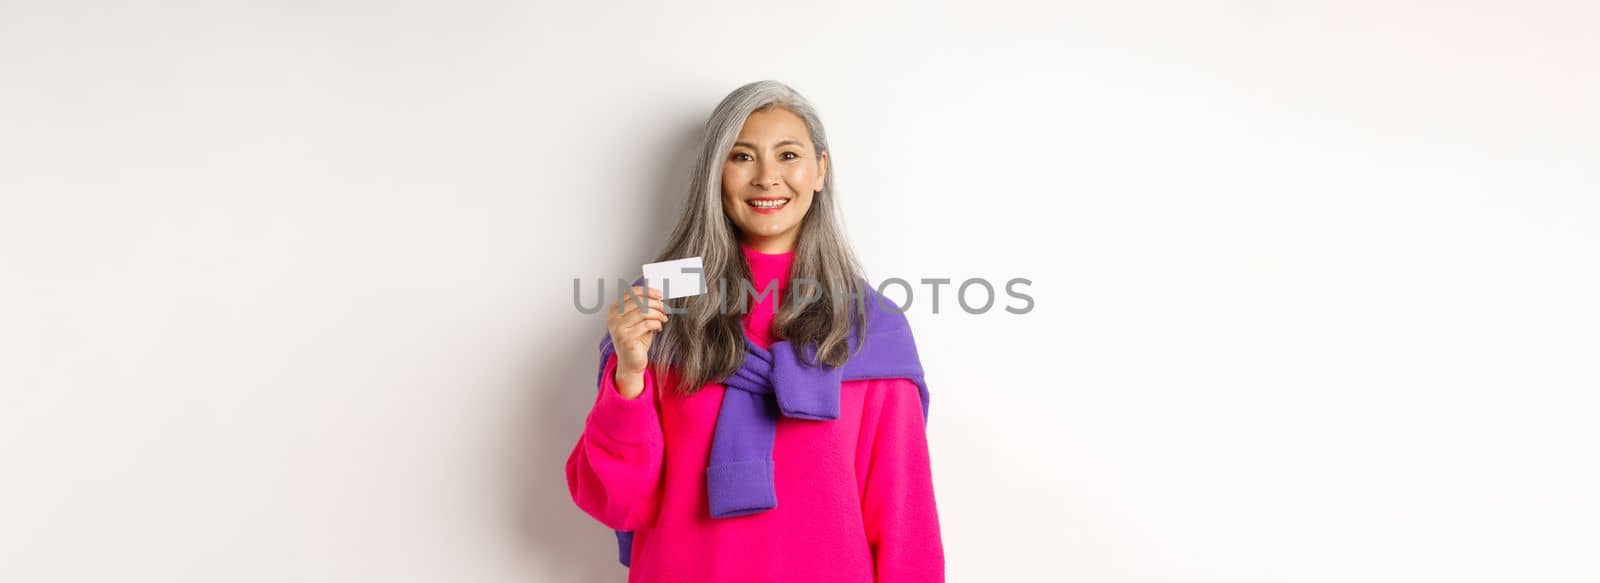 Shopping concept. Smiling asian middle-aged woman with grey hair showing plastic credit card and looking happy, standing over white background.